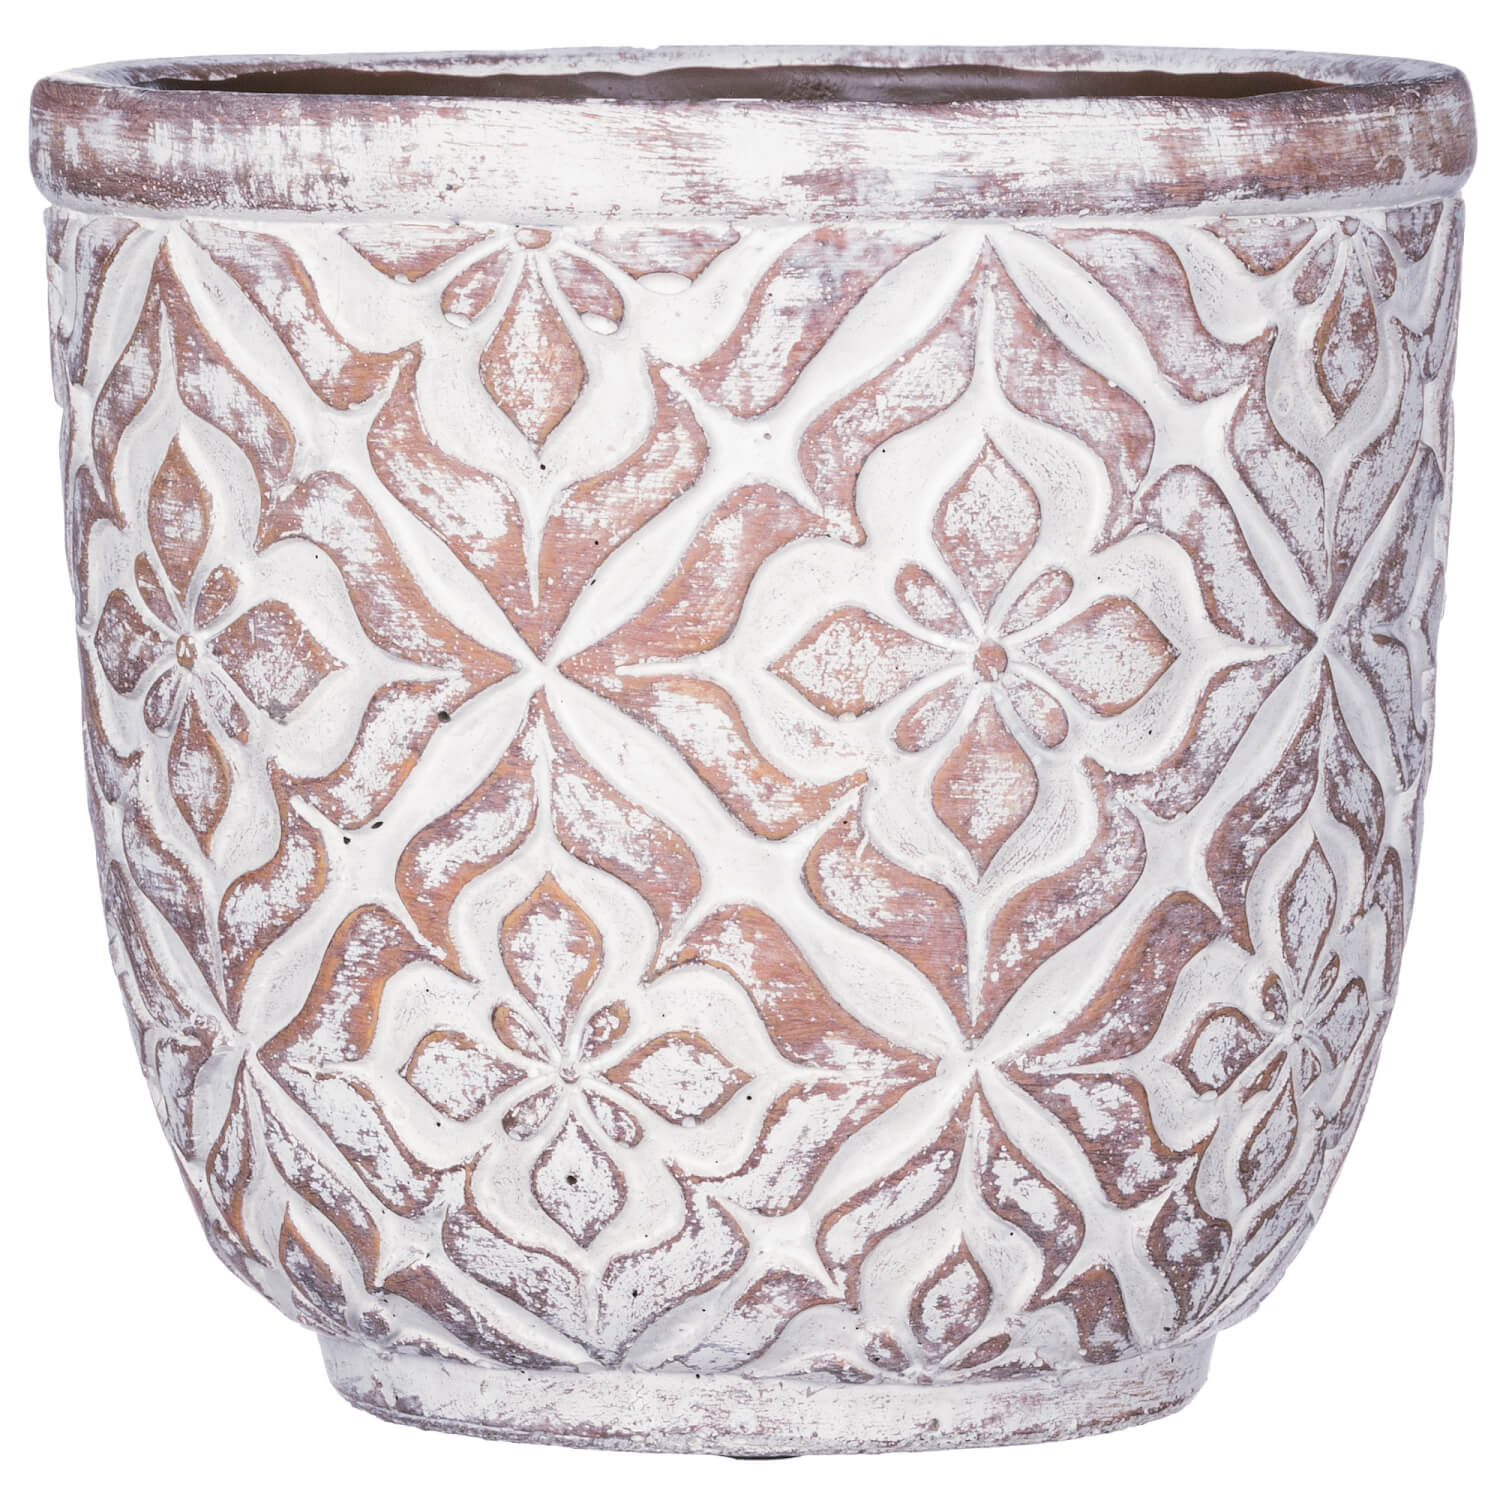 round pot with white-wash finish highlighting the geometric floral pattern.